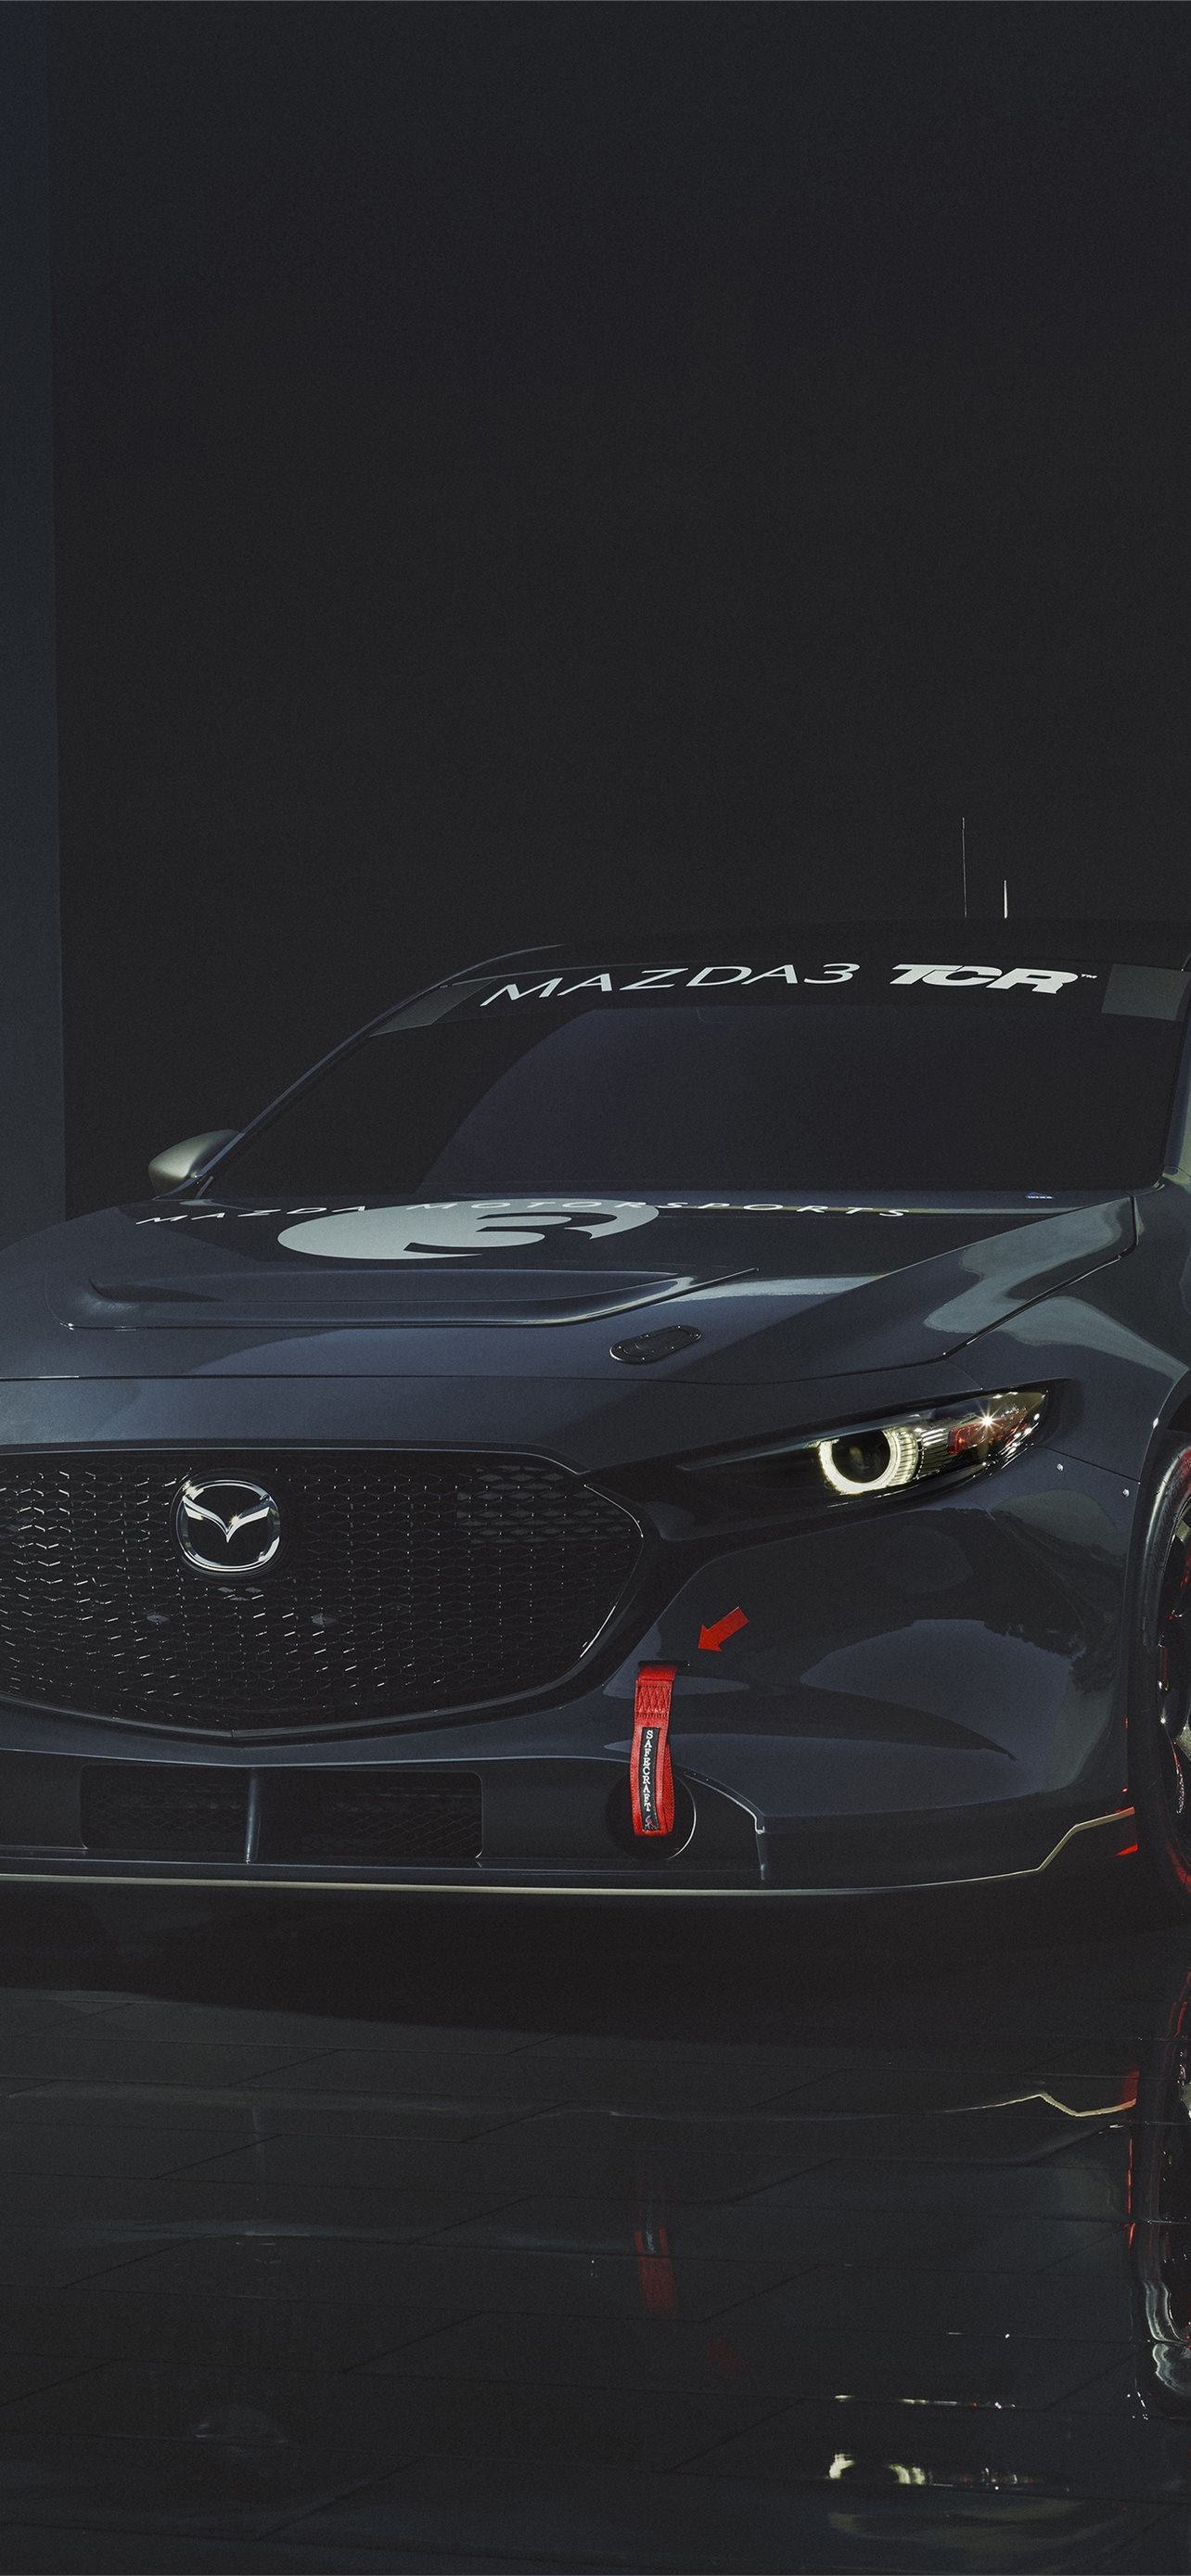 Mazda 3 Iphone Wallpapers Free Download